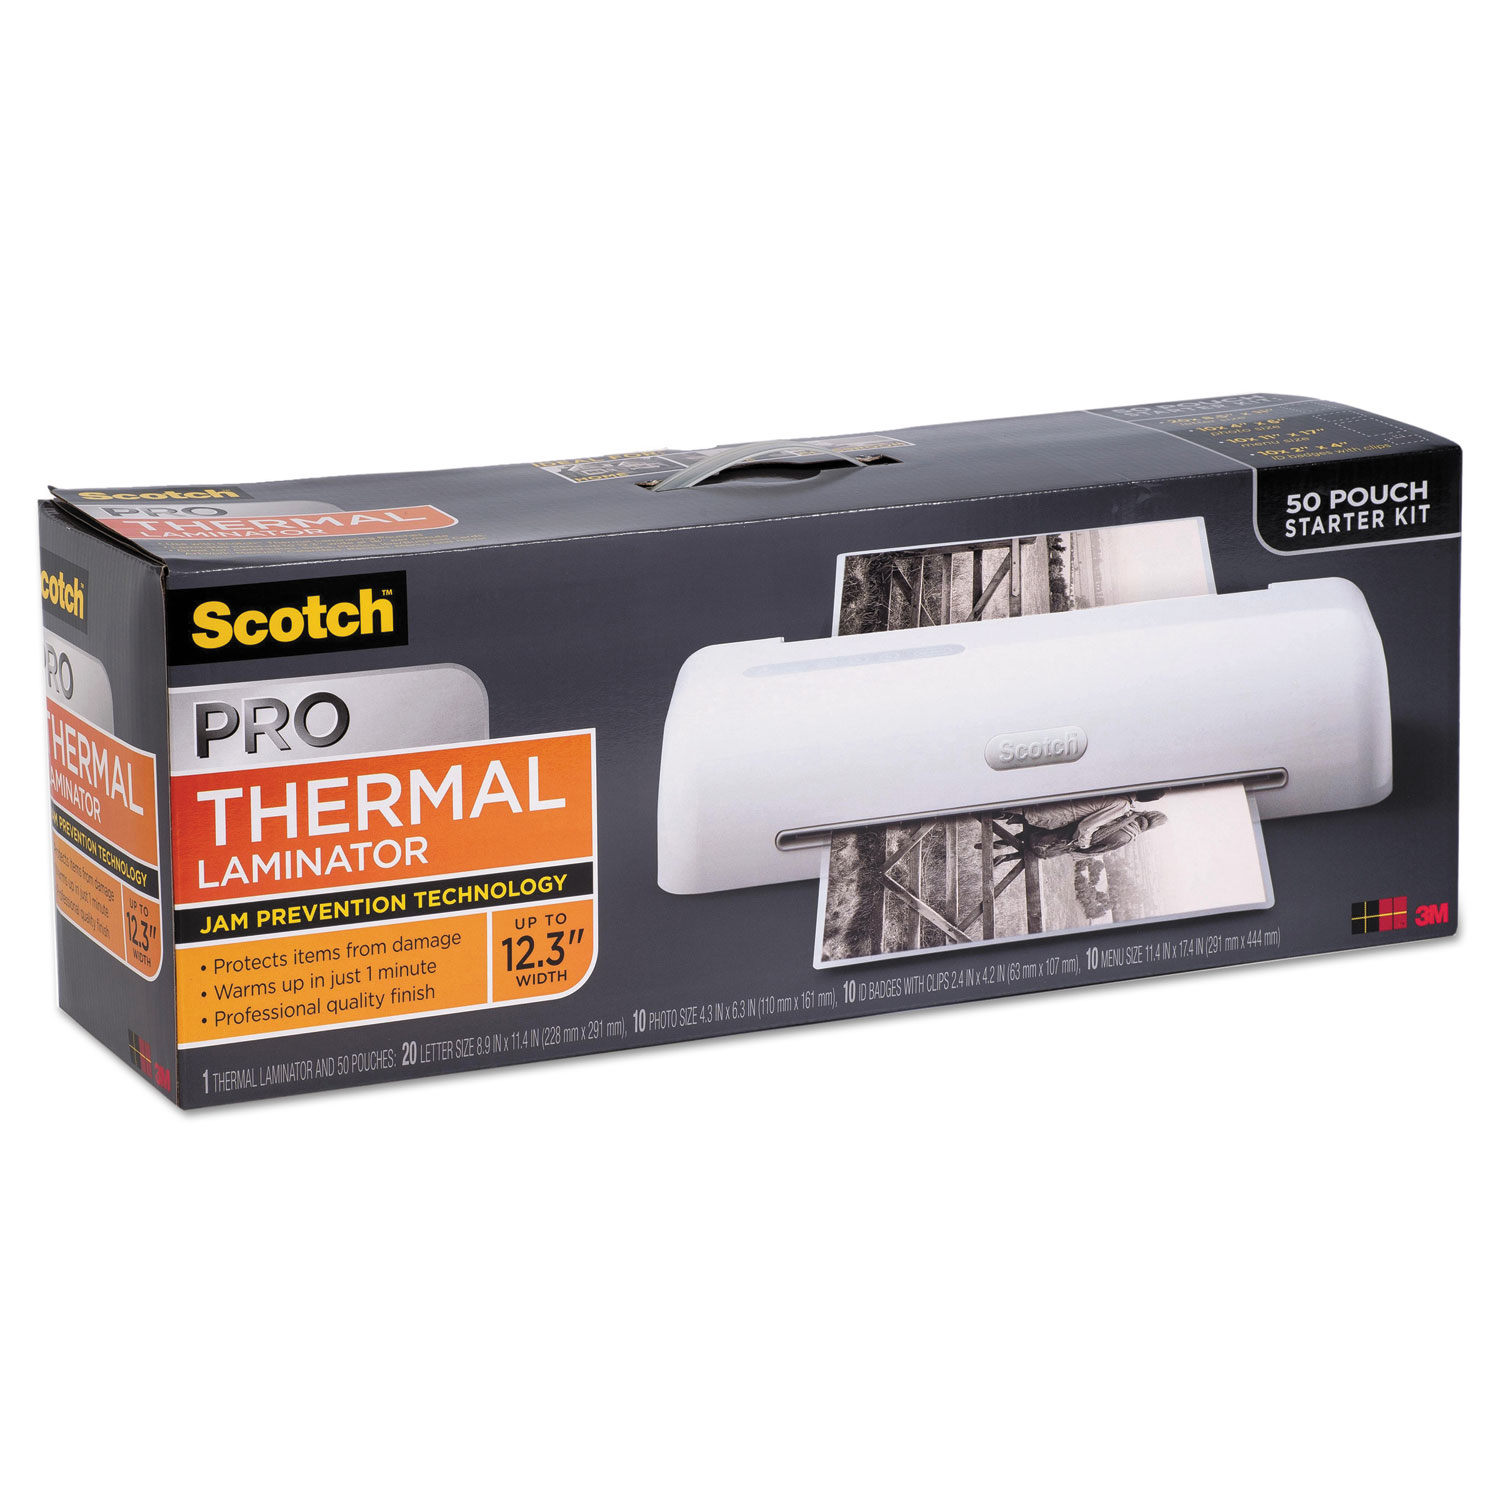 Pro 12 1/3 Thermal Laminator Value Pack, 50 Letter Size Laminating Pouches